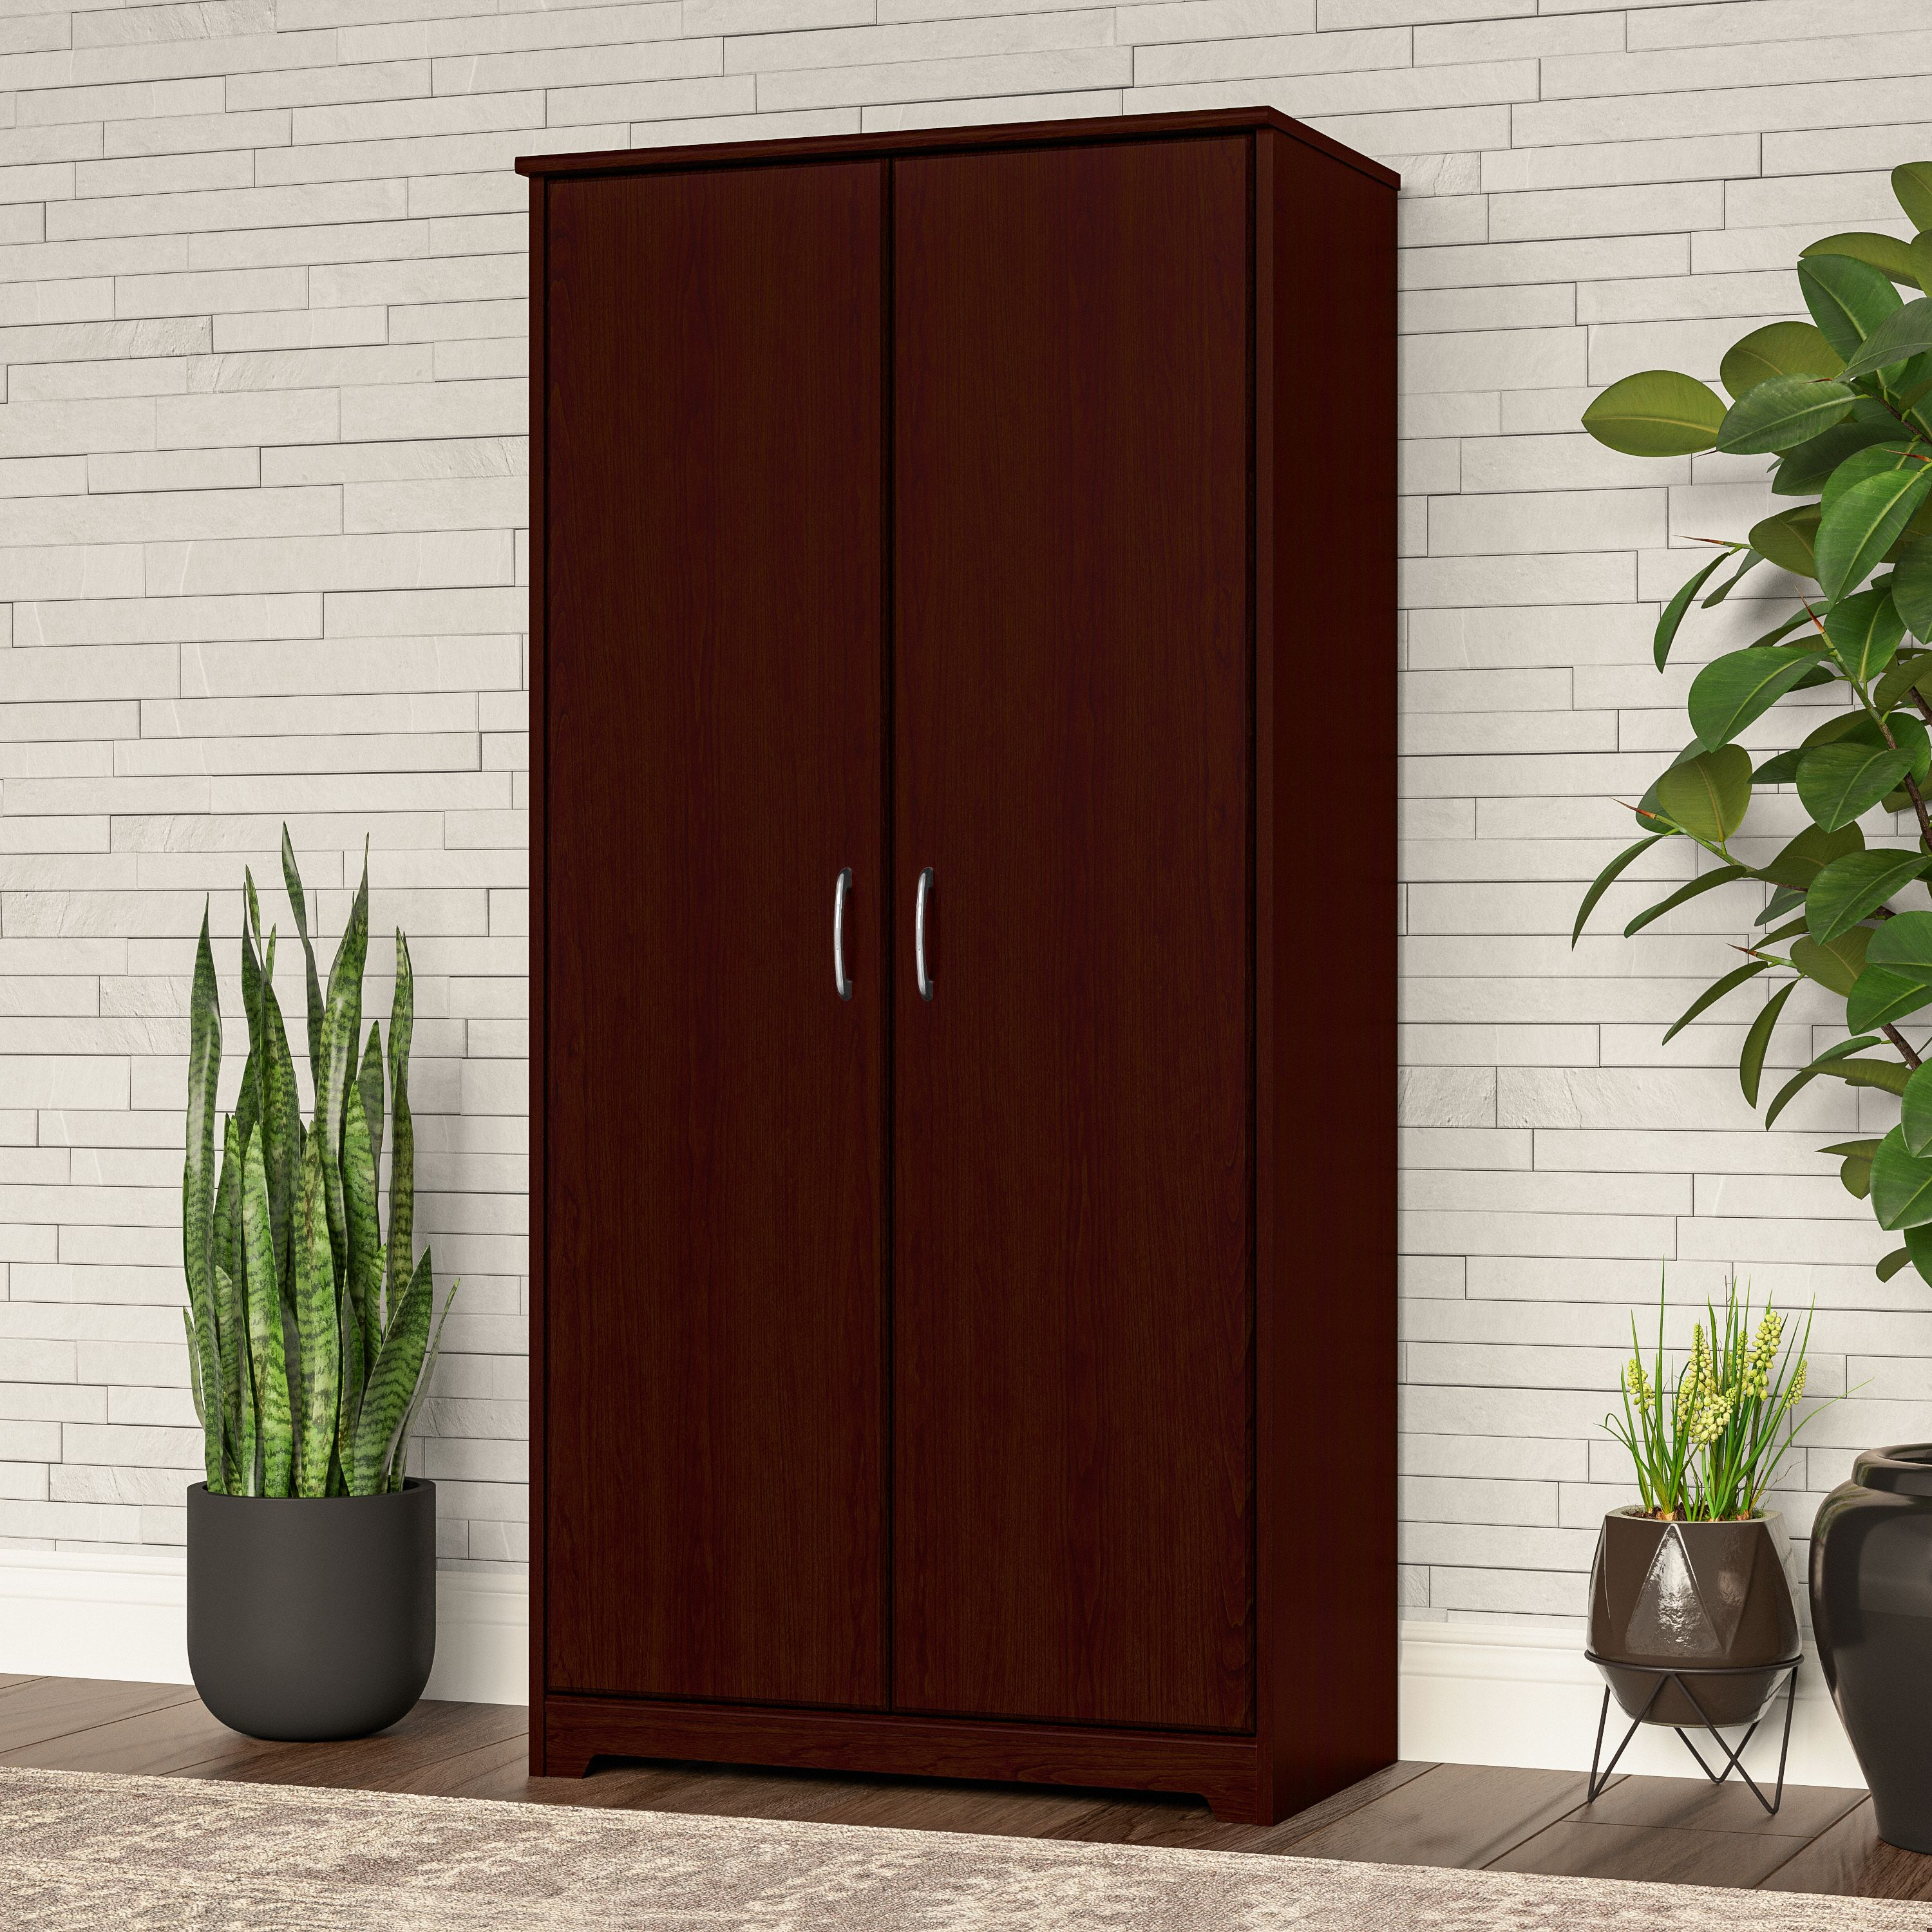 Shop Bush Furniture Cabot Tall Storage Cabinet with Doors 01 WC31499 #color_harvest cherry